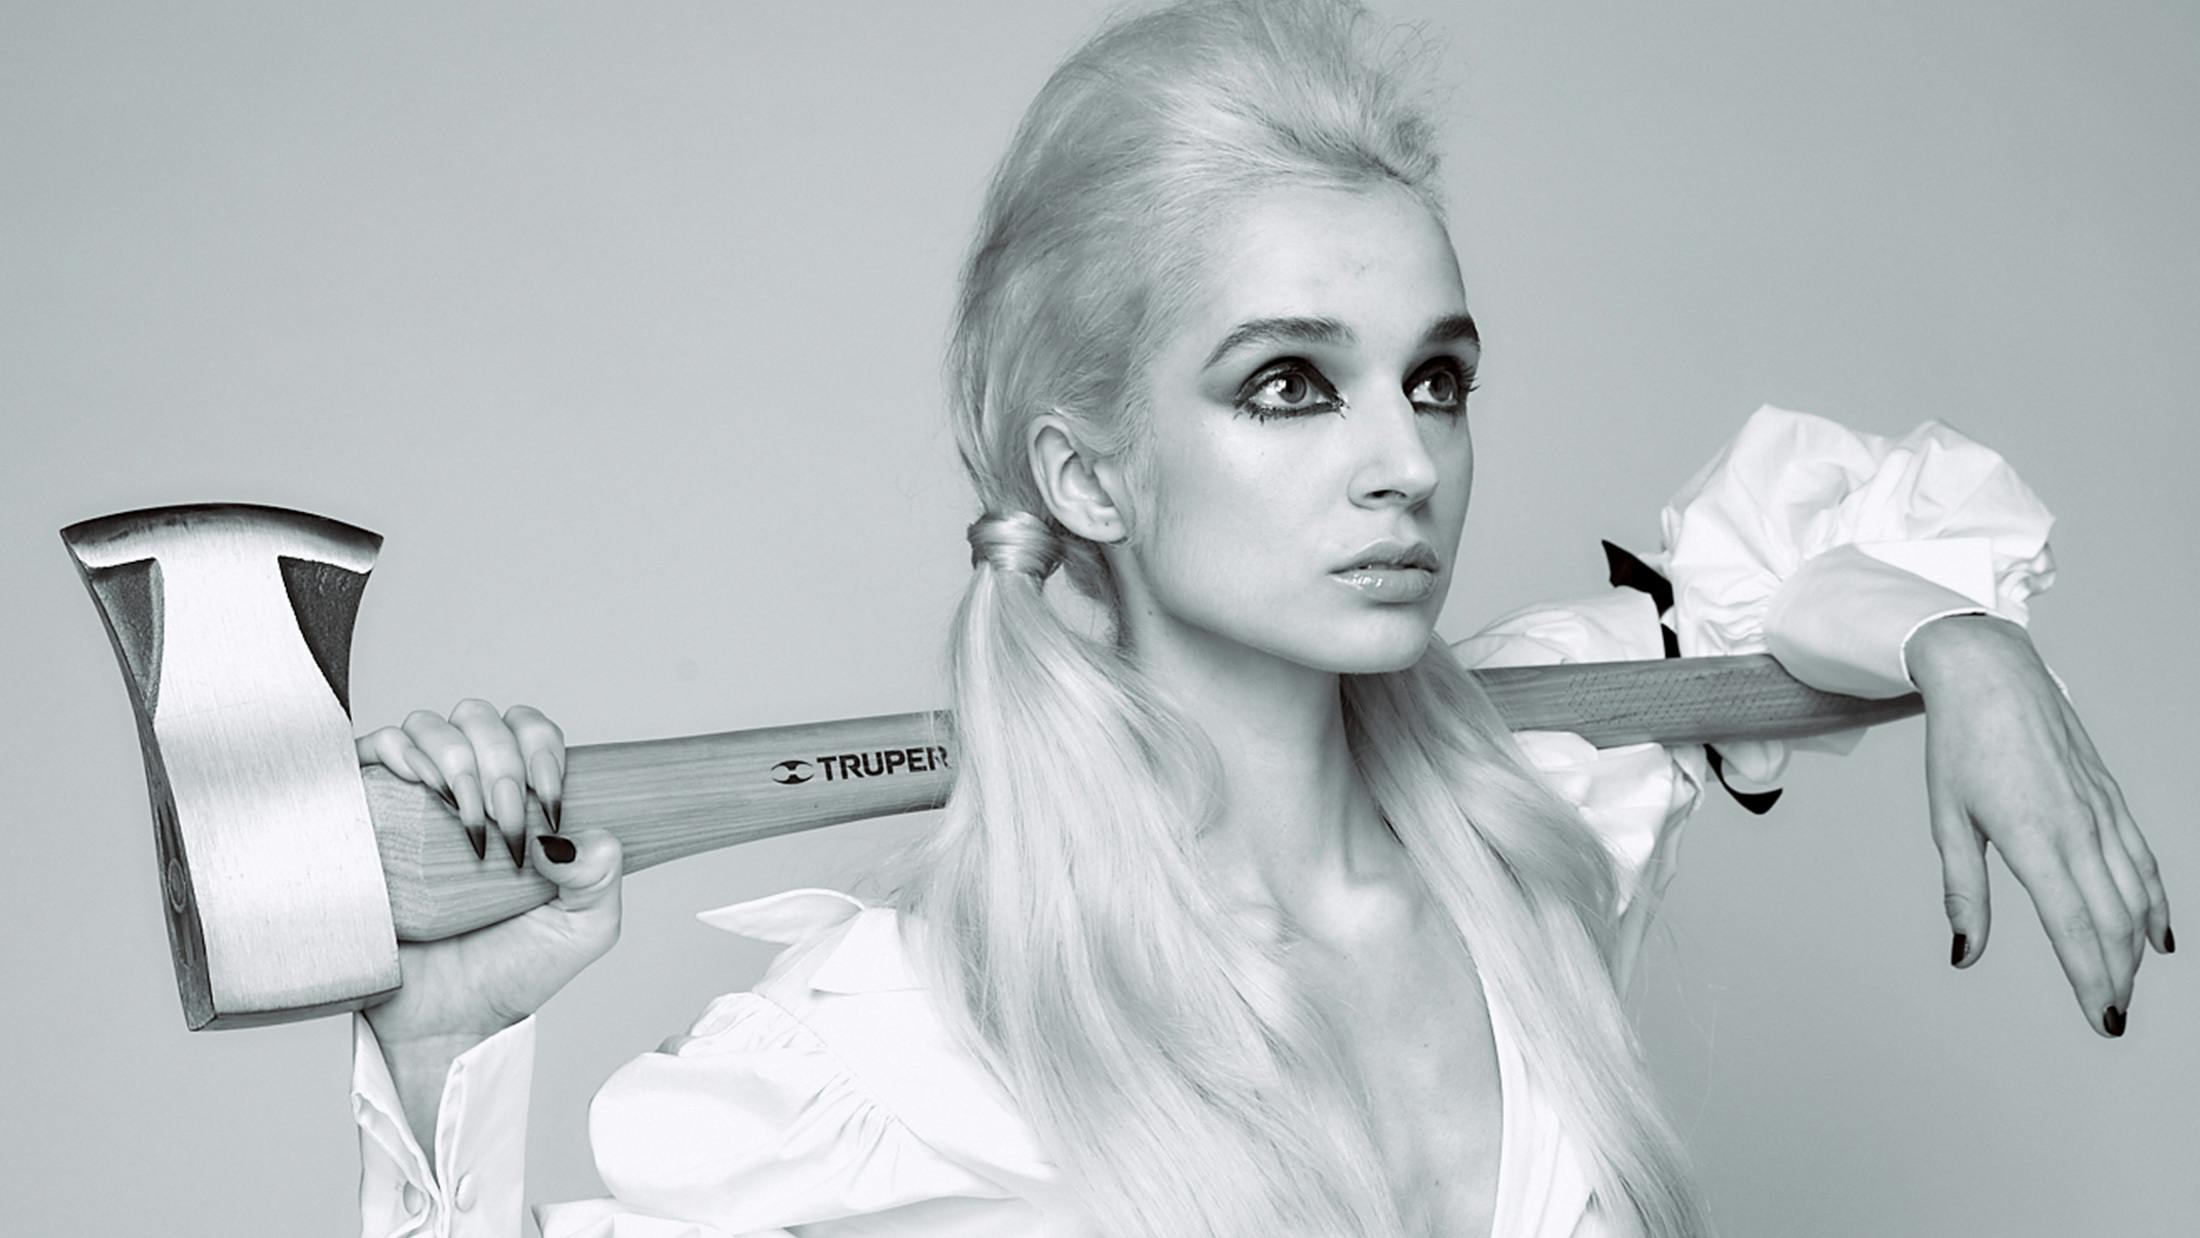 Poppy: The 10 songs that changed my life